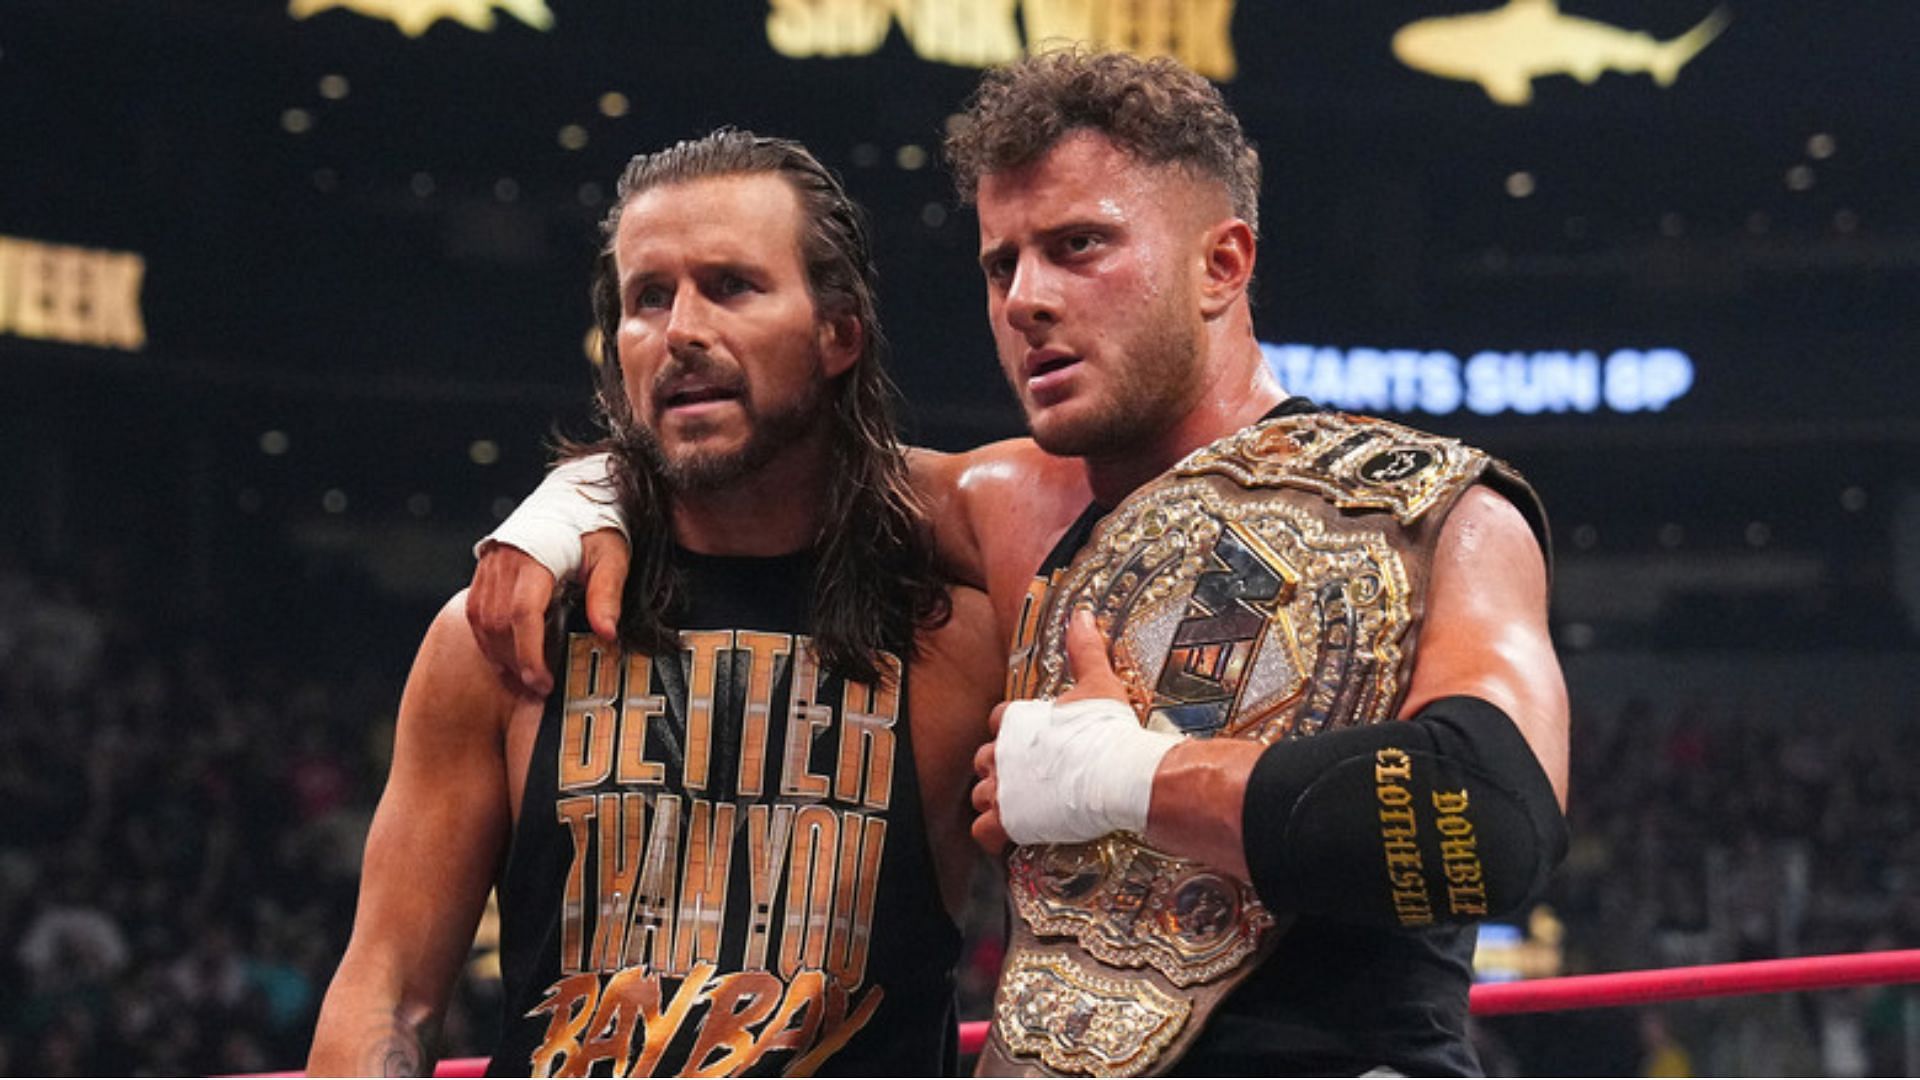 MJF and Adam Cole will be pulling double duty at All In